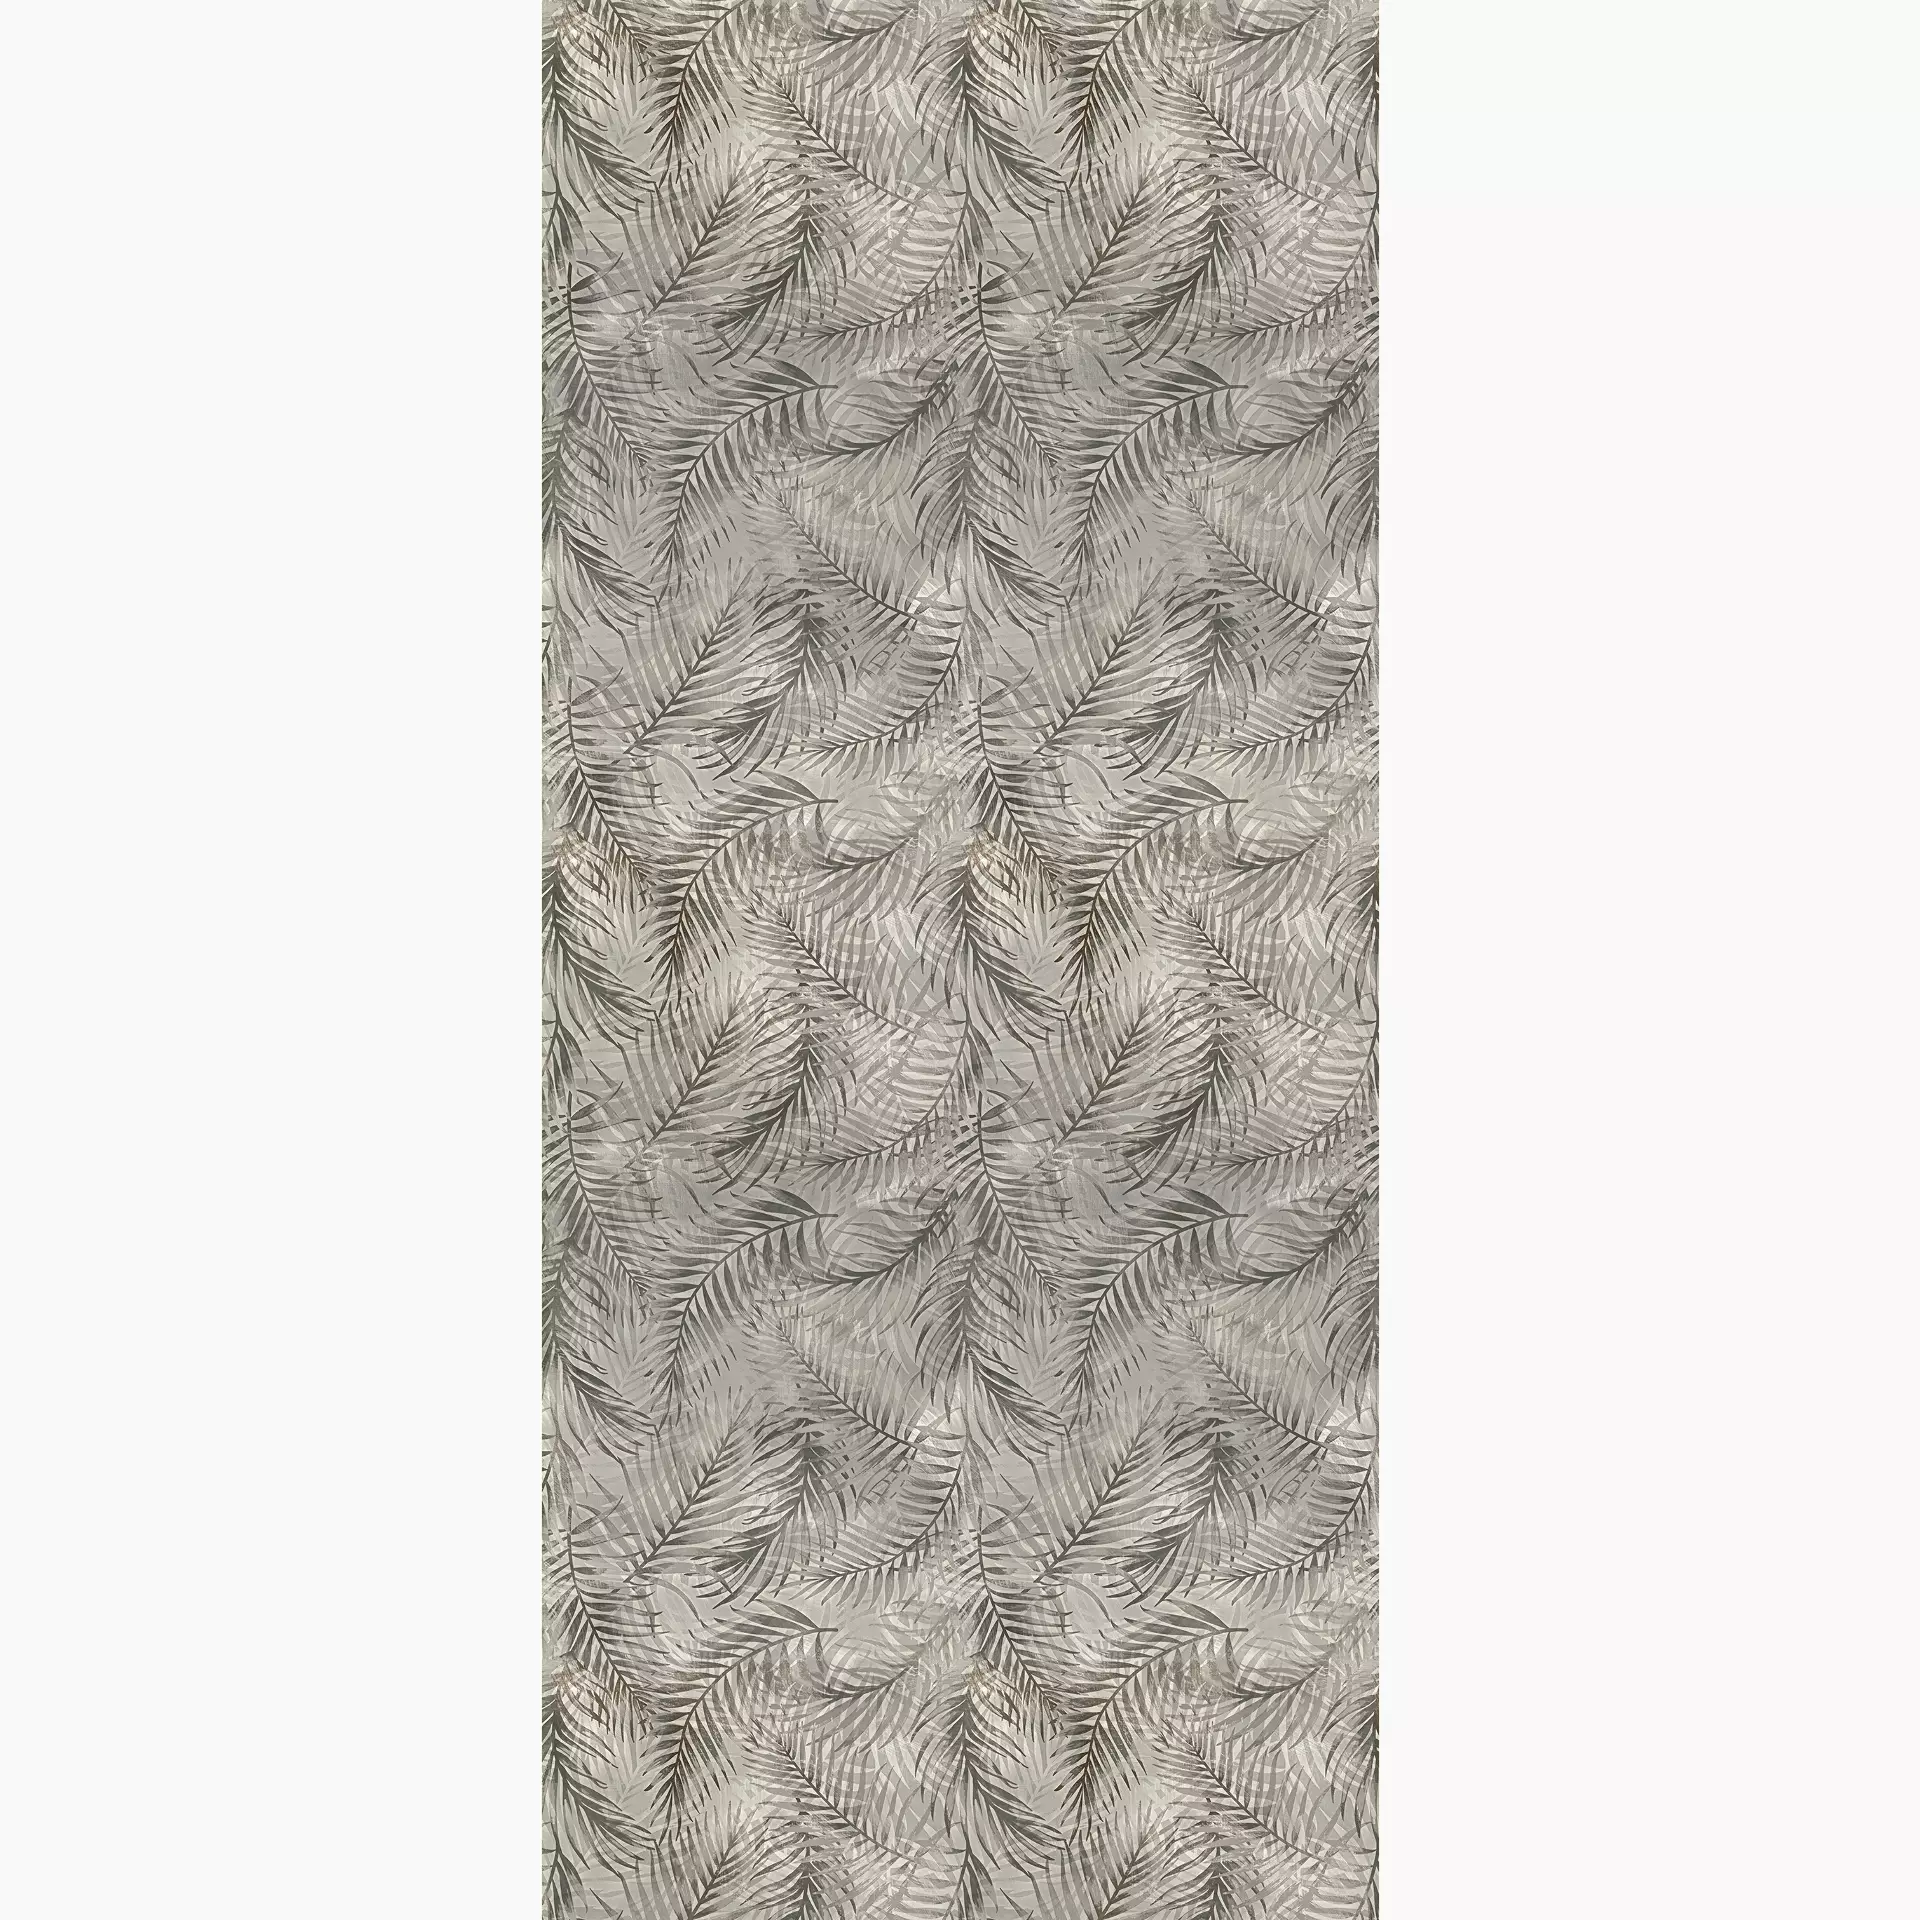 Fondovalle Dream Plume Natural Decor DRM127 120x278cm rectified 6,5mm